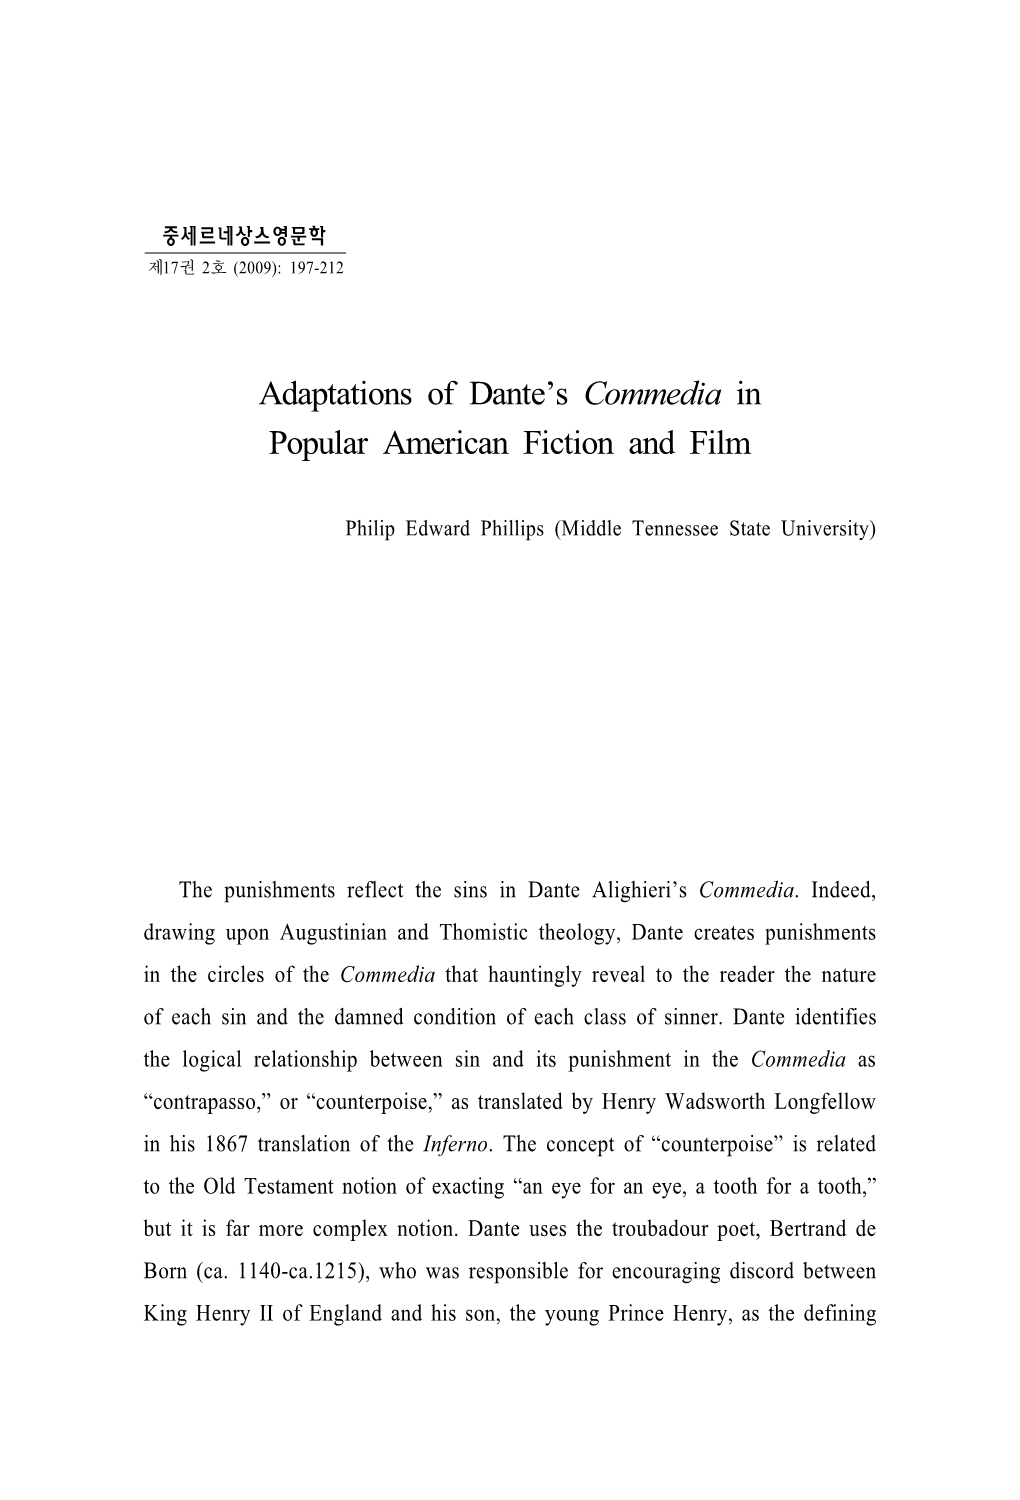 Adaptations of Dante's Commedia in Popular American Fiction and Film